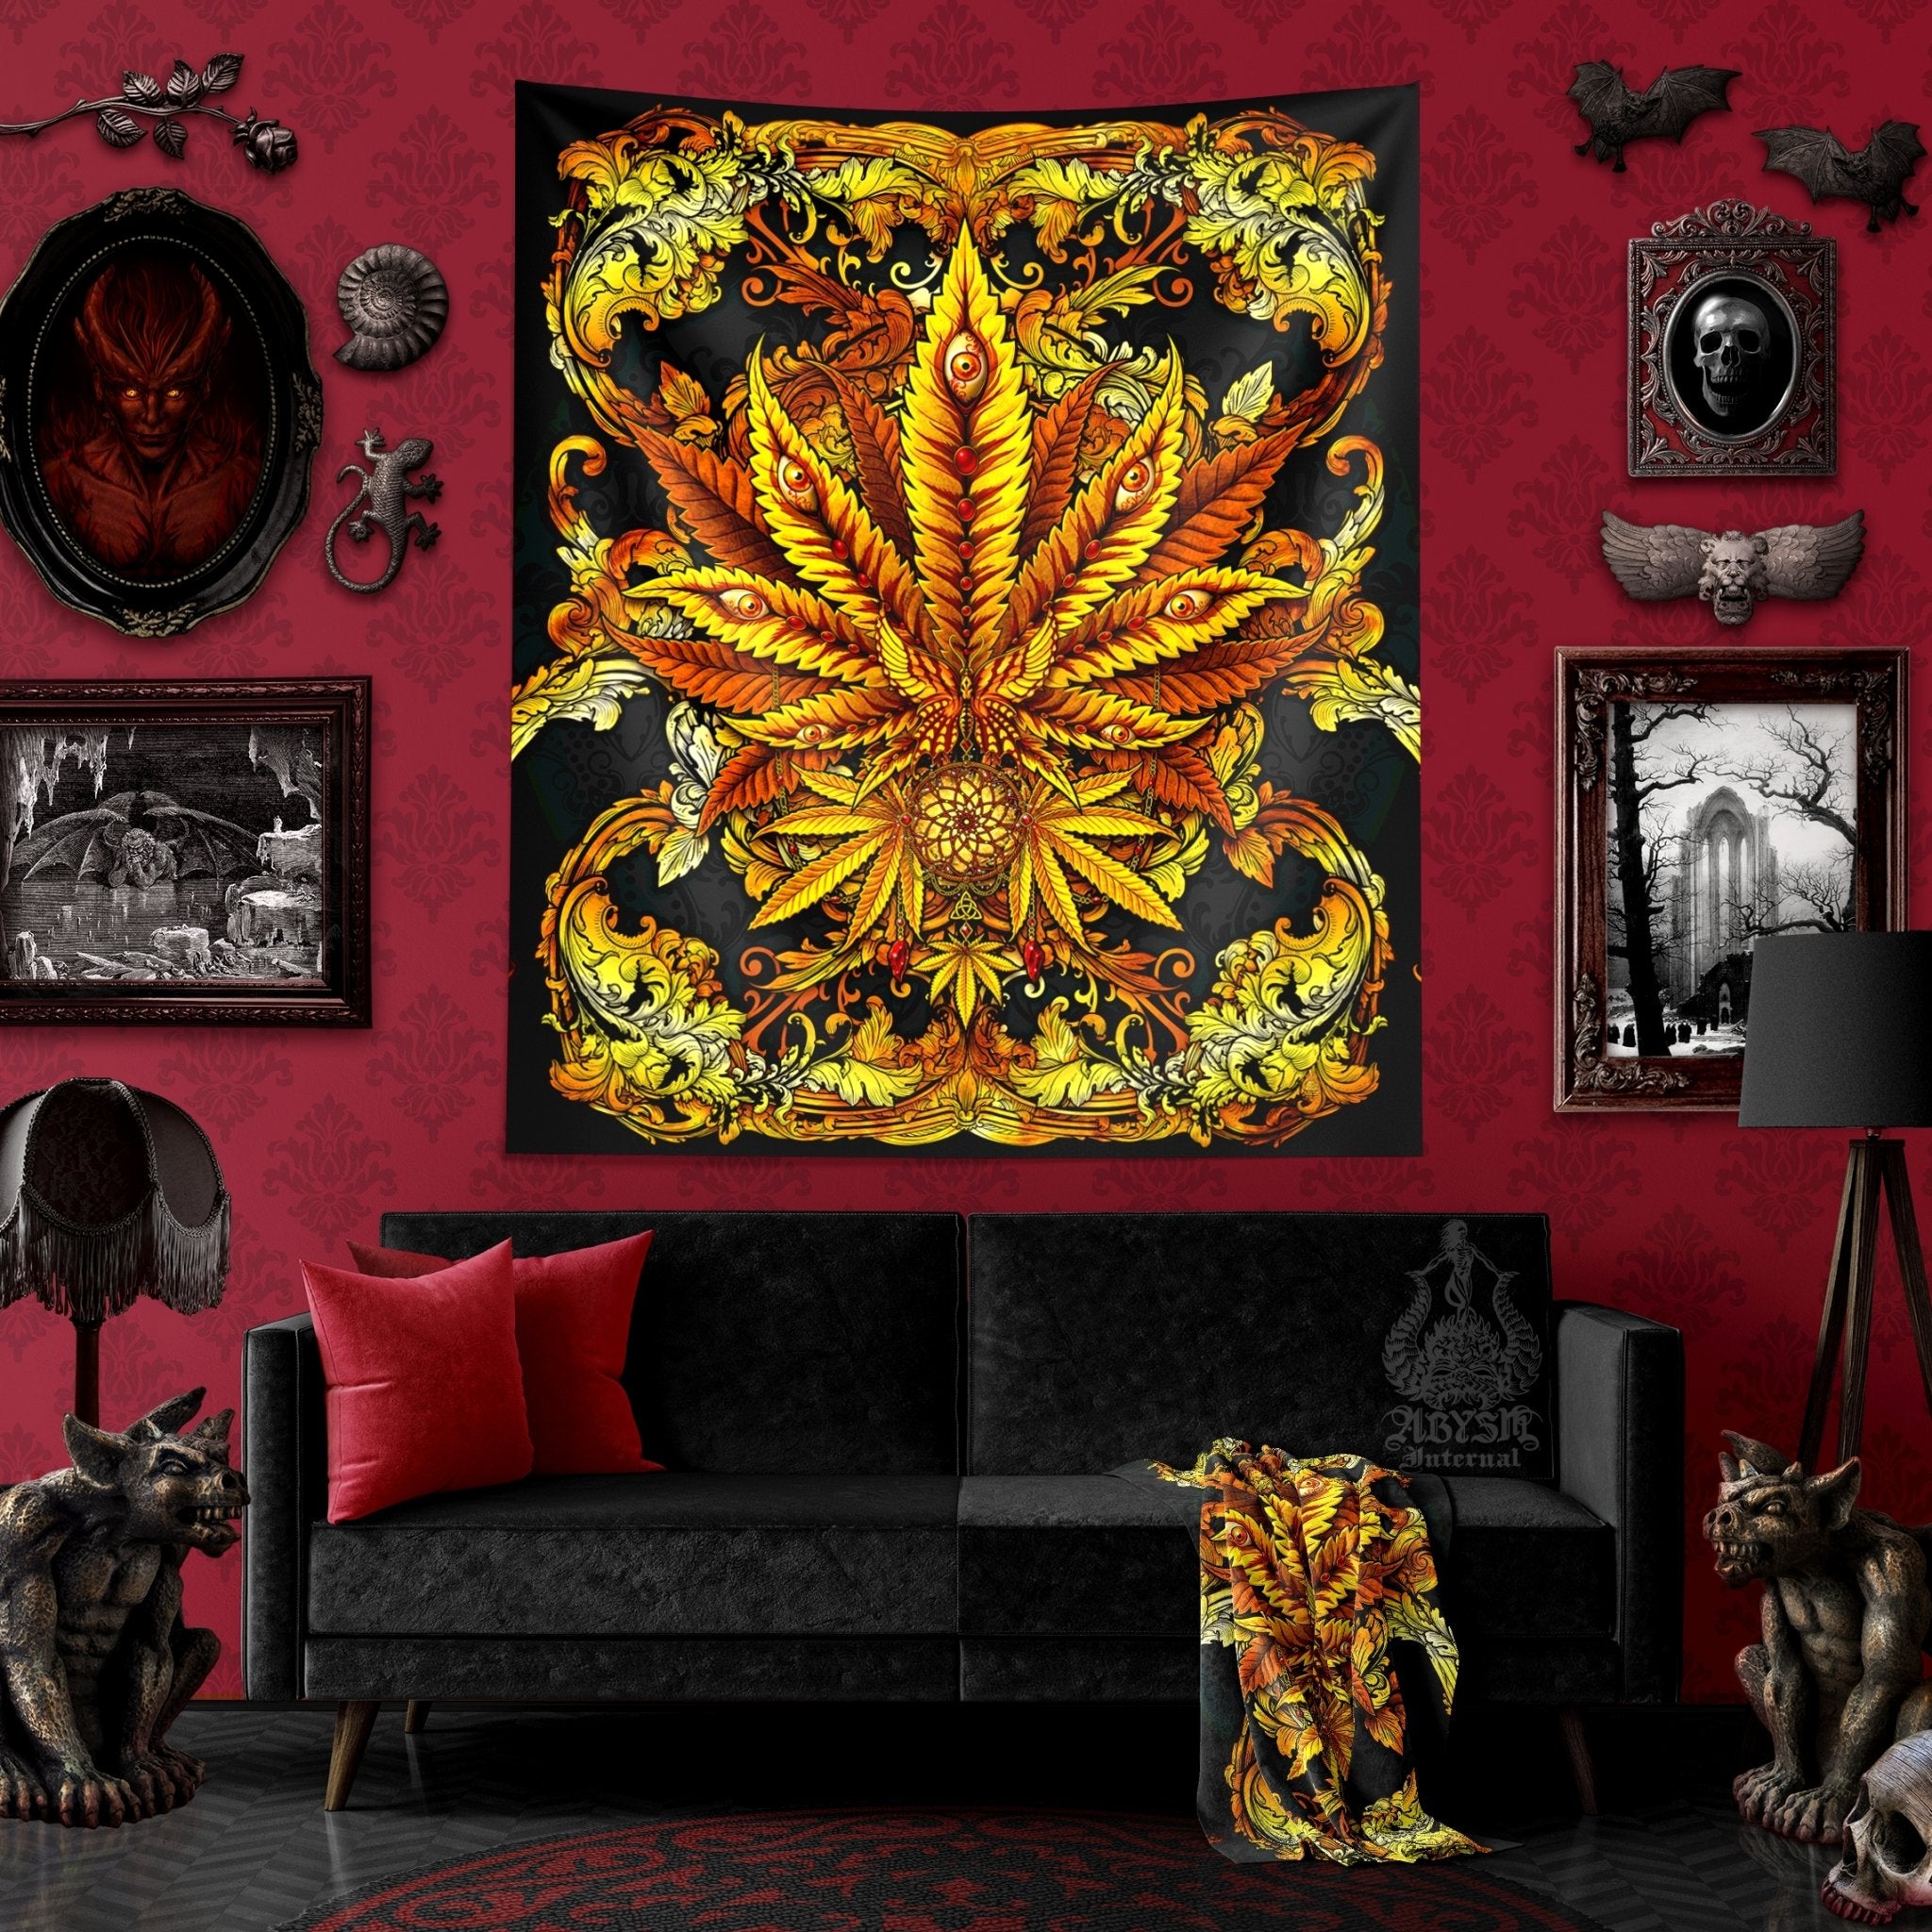 Weed Tapestry, Cannabis Shop Decor, Marijuana Wall Hanging, Indie Home Decor, Eclectic Art Print, 420 Gift - Gold - Abysm Internal